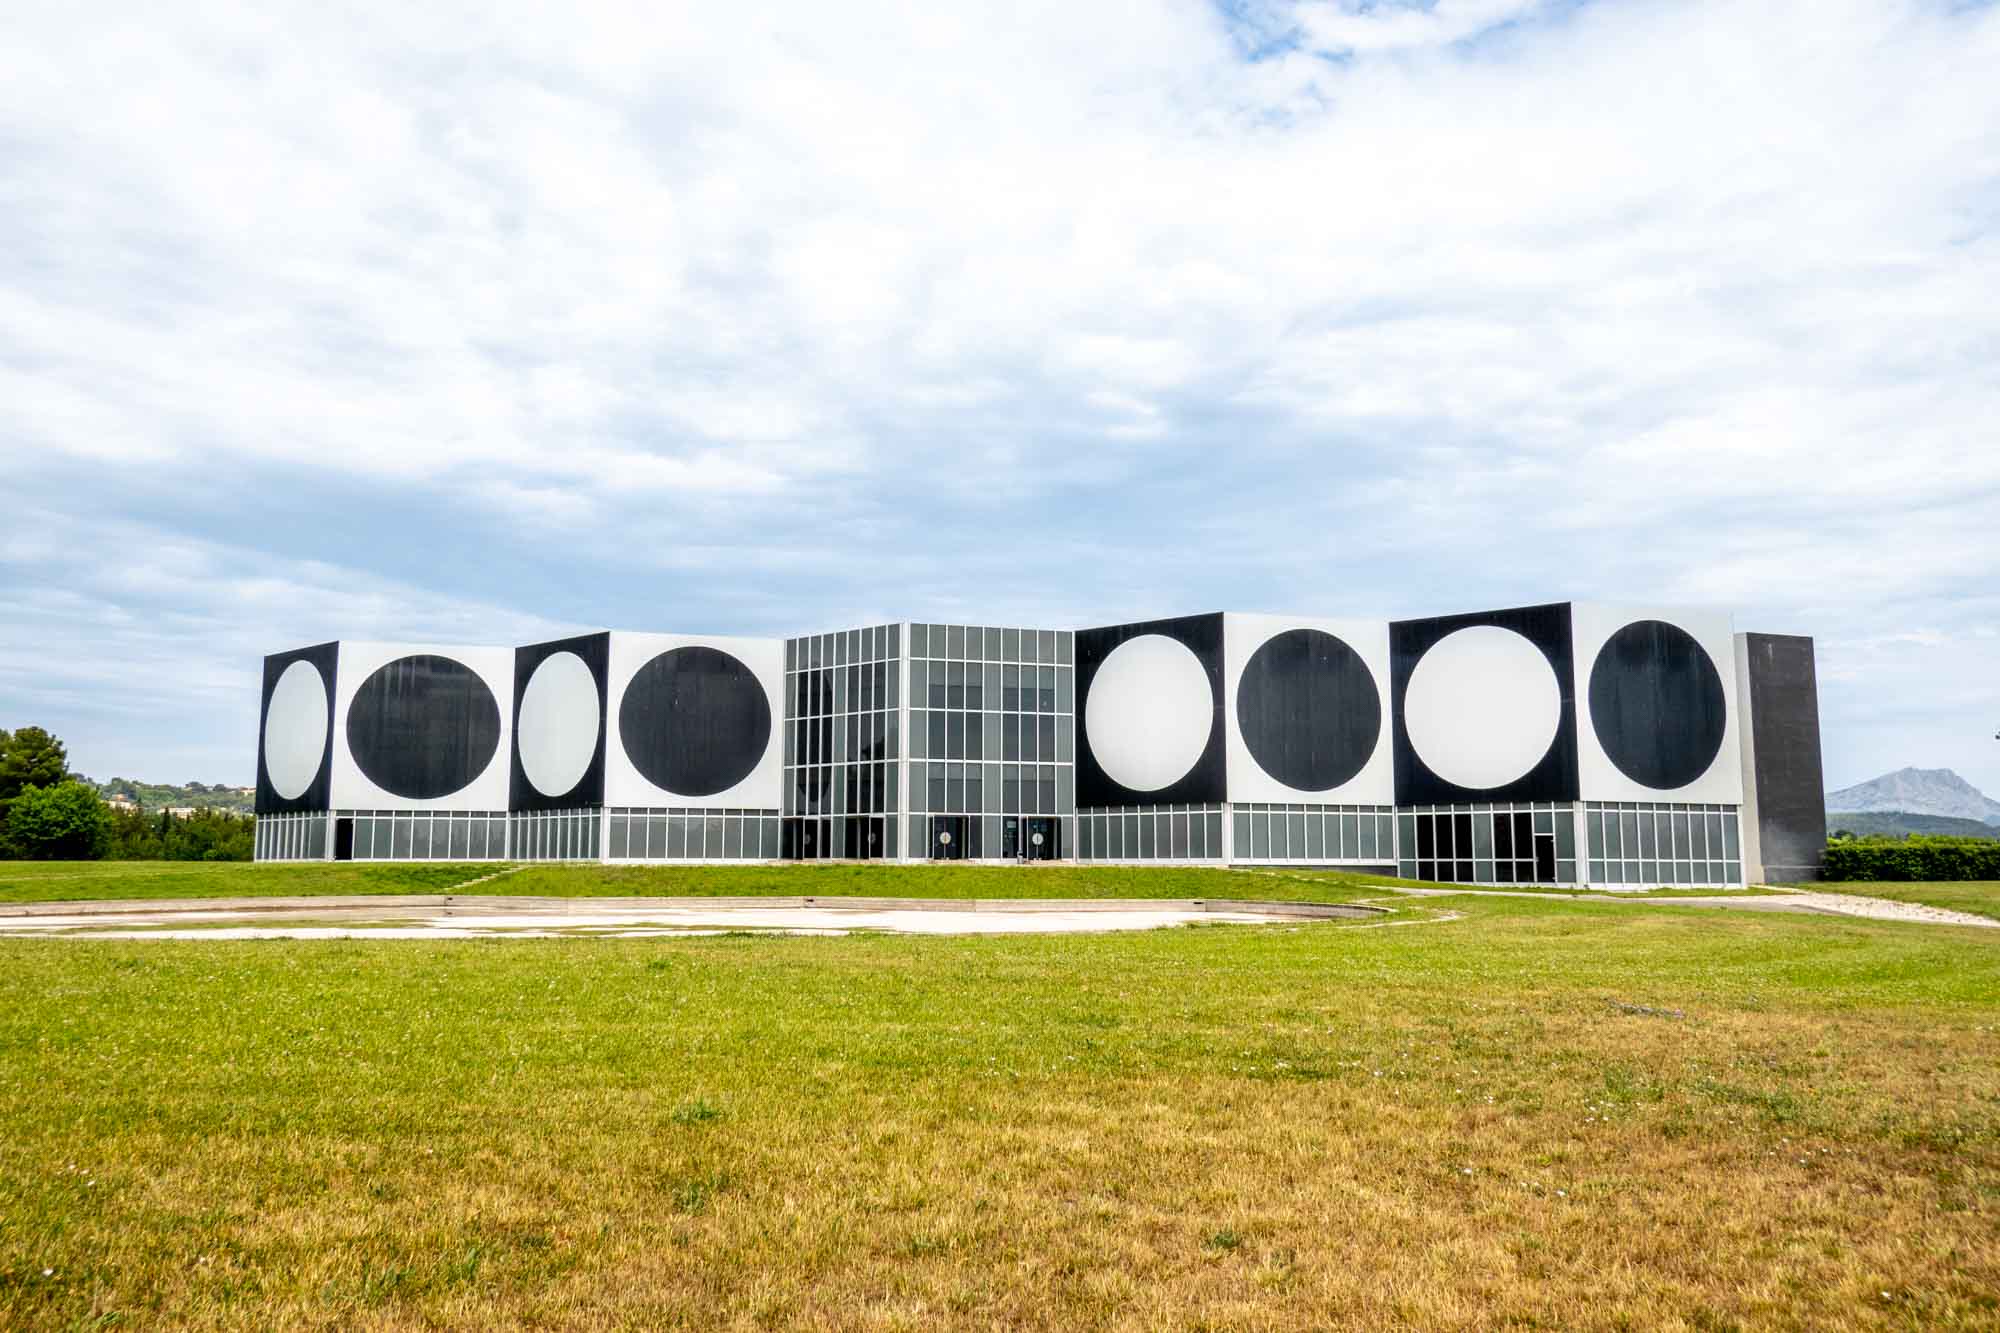 Exterior of a building with a graphic design of black and white circles and squares